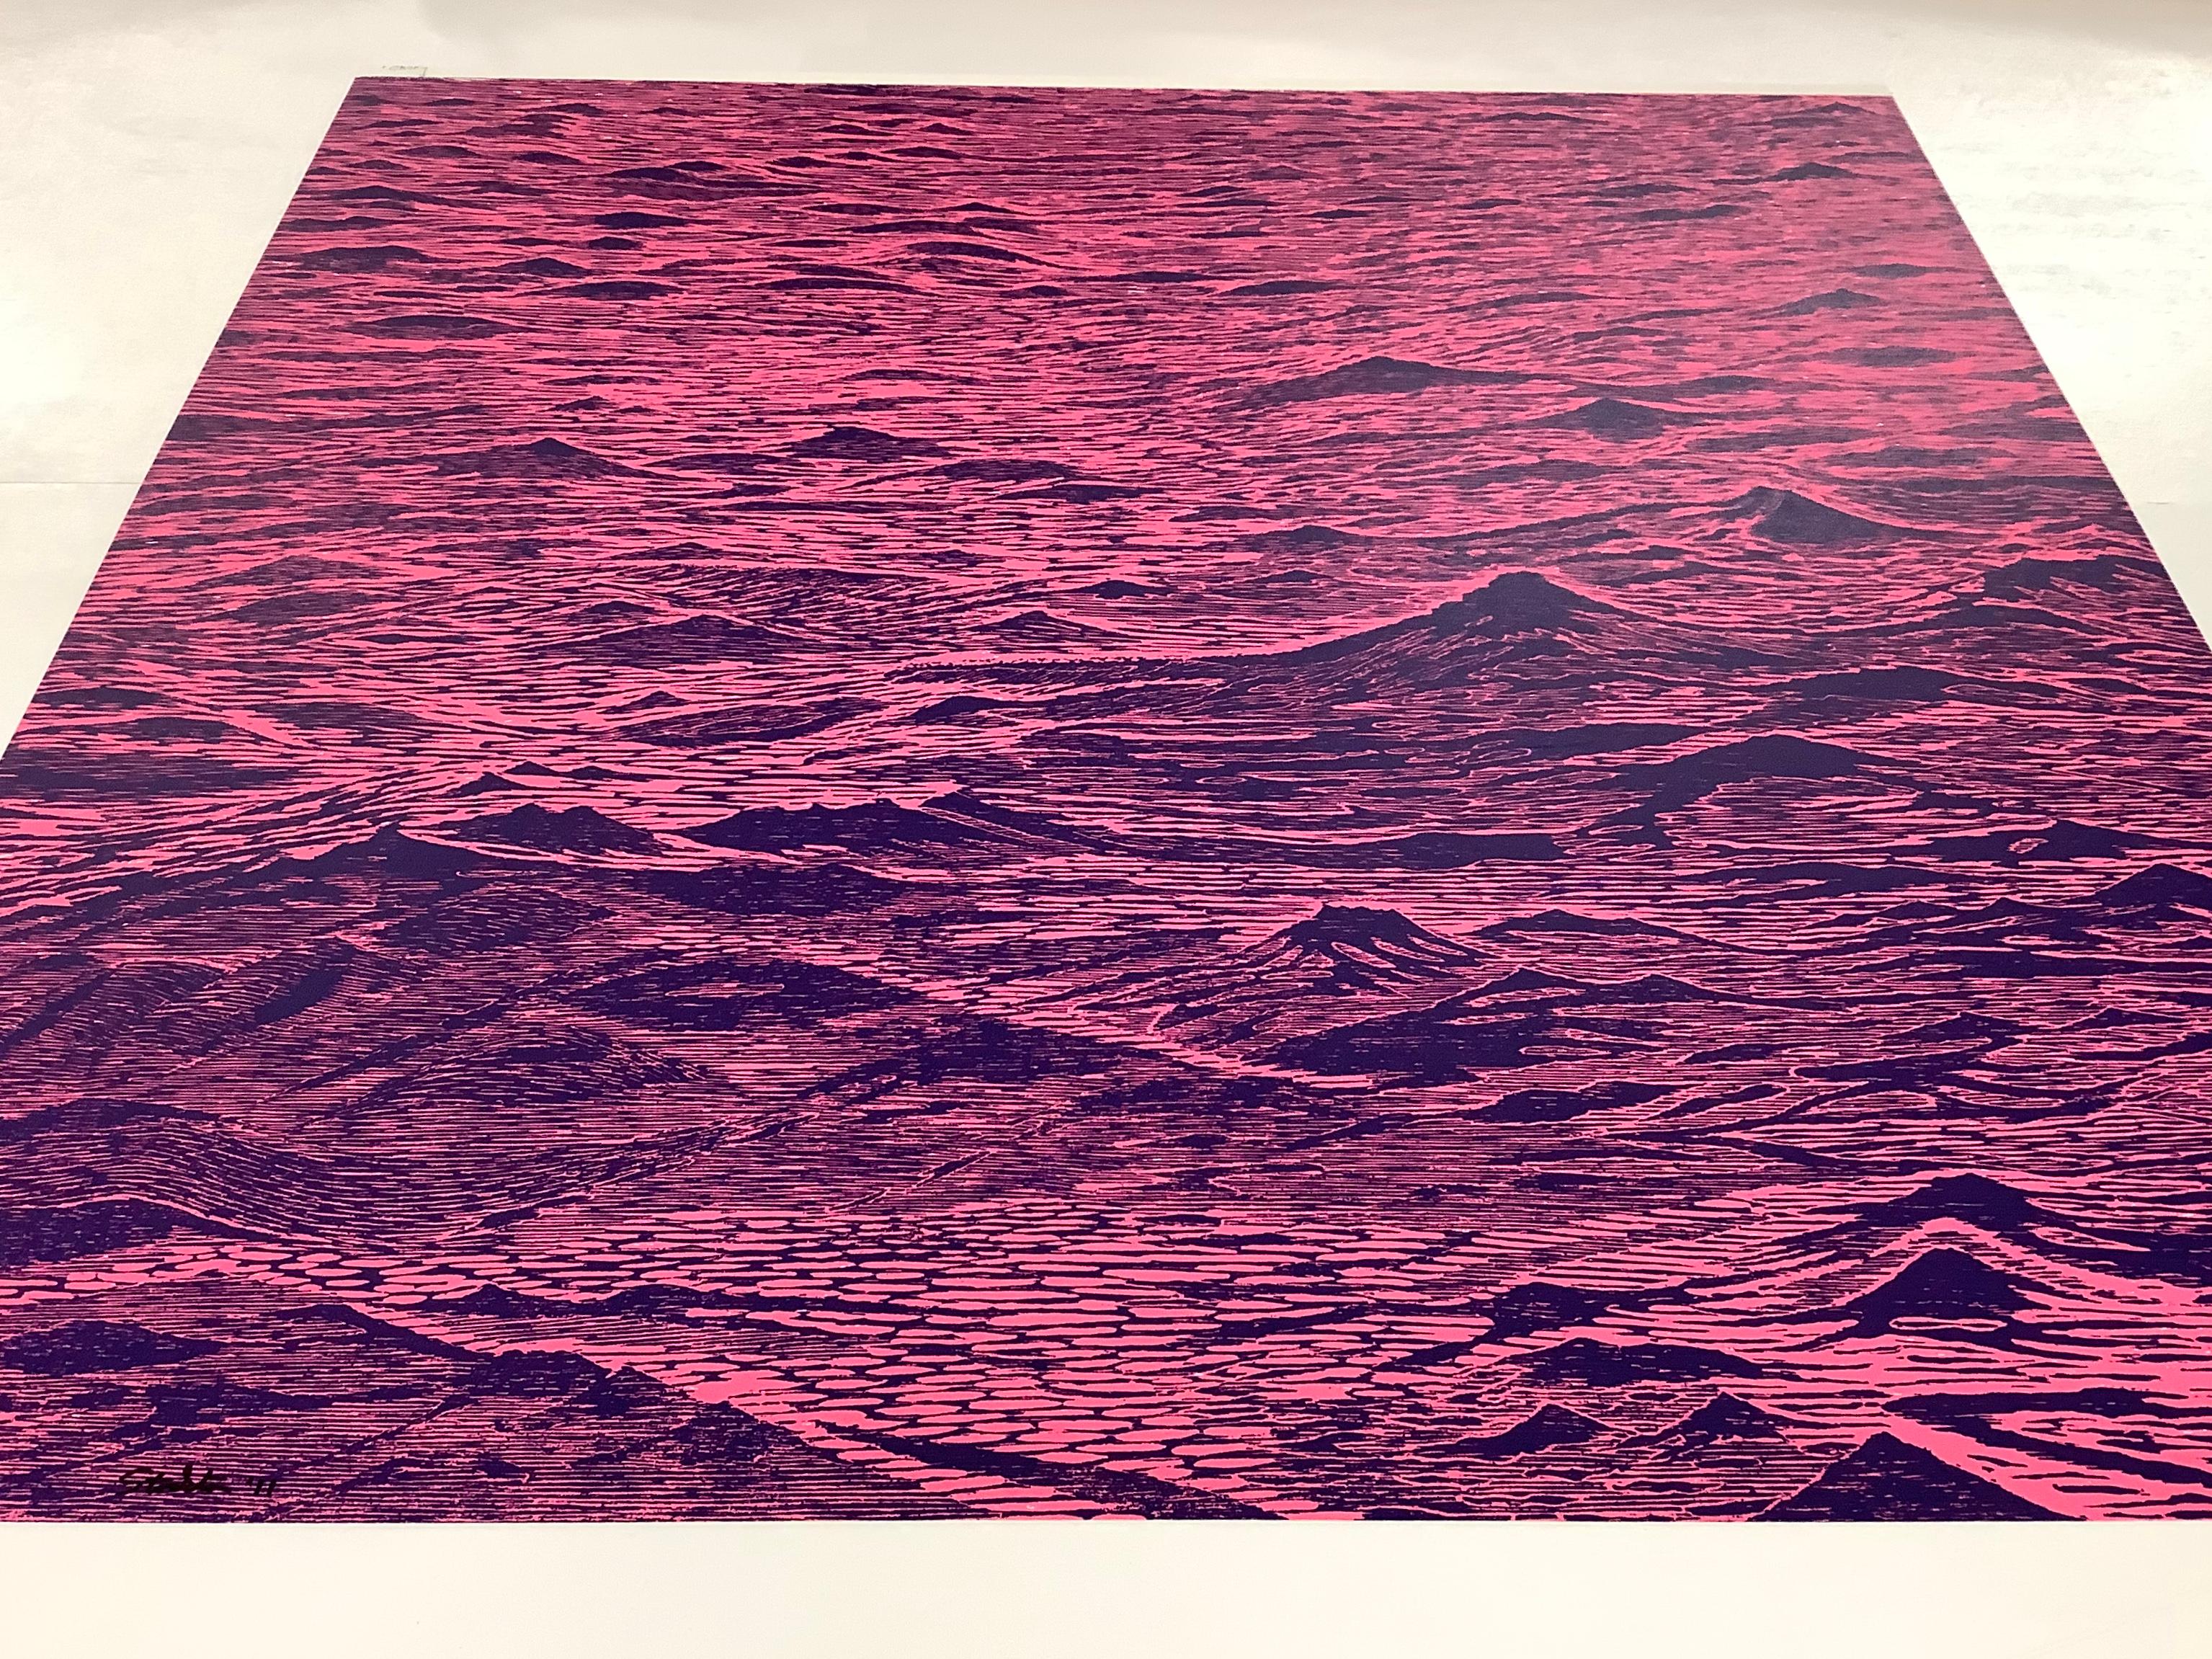 This woodcut print evokes the peacefulness of ocean waves depicted in bright pink and deep, dark cobalt blue, bringing to mind the tradition of Japanese printing while being distinctly contemporary. 

Edition 1/2. Signed and stamped CCP (Center for